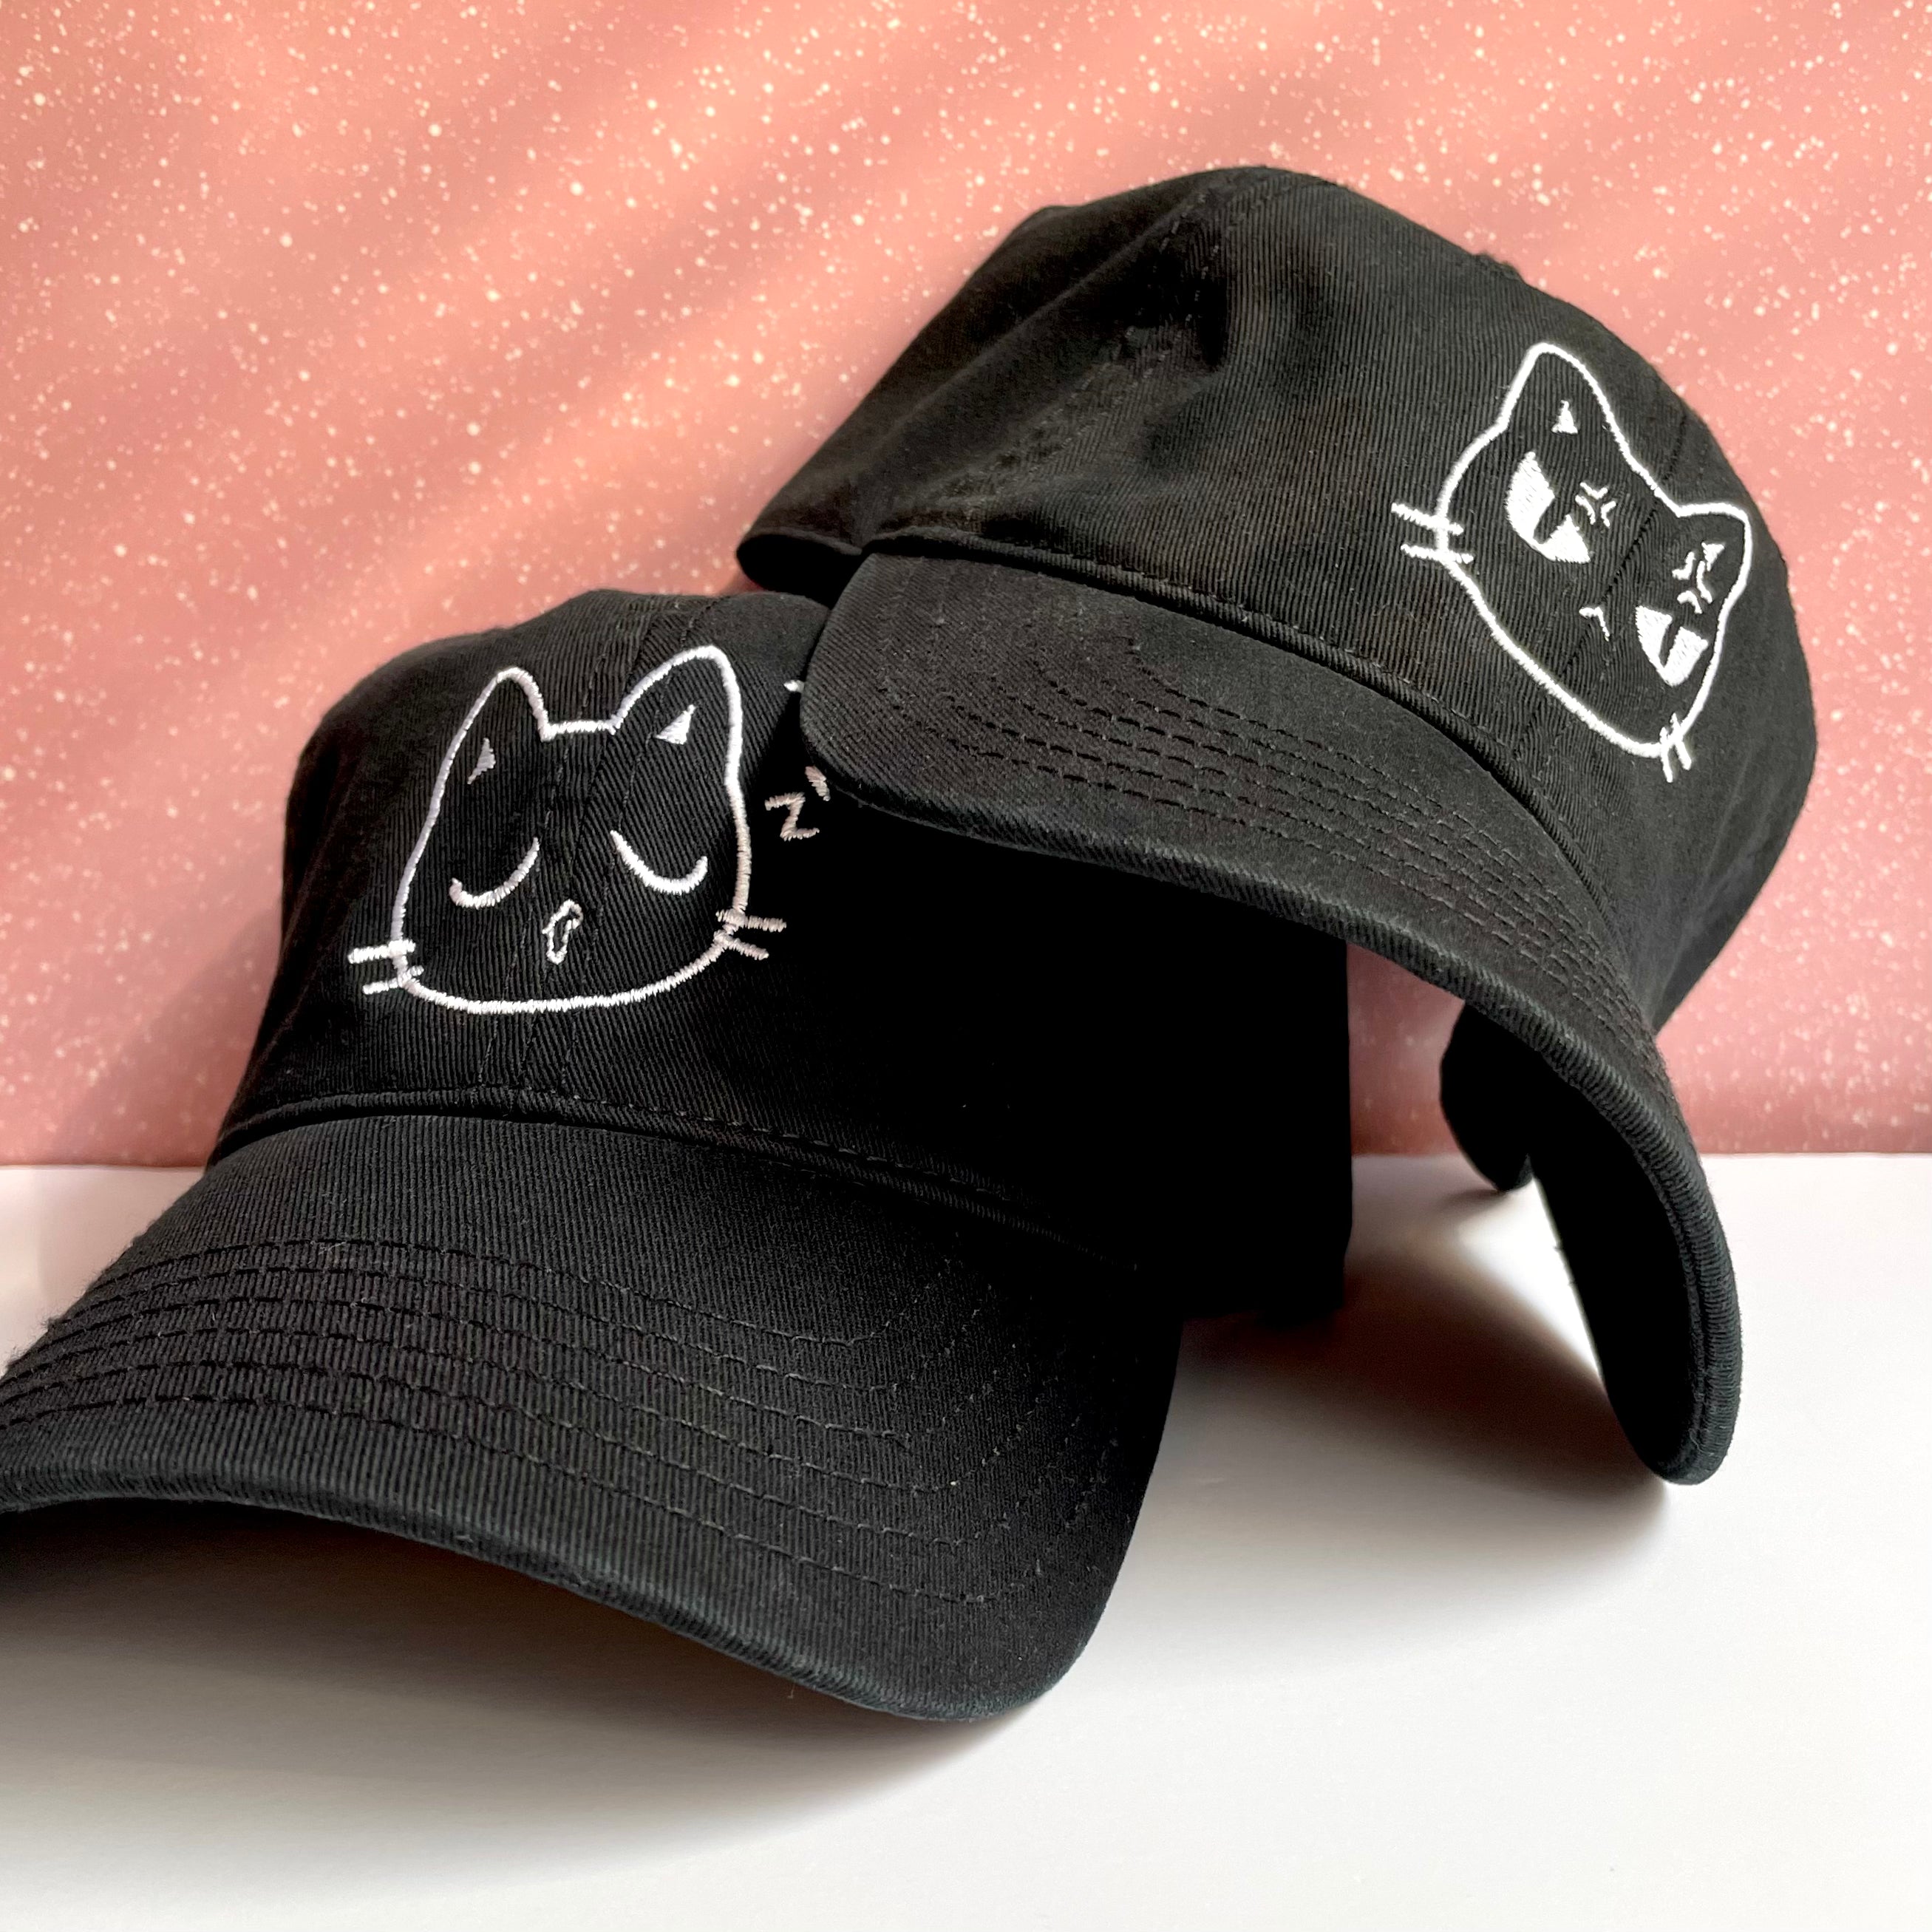 GLOW IN THE DARK CAT EXPRESSIONS BLACK DAD HAT